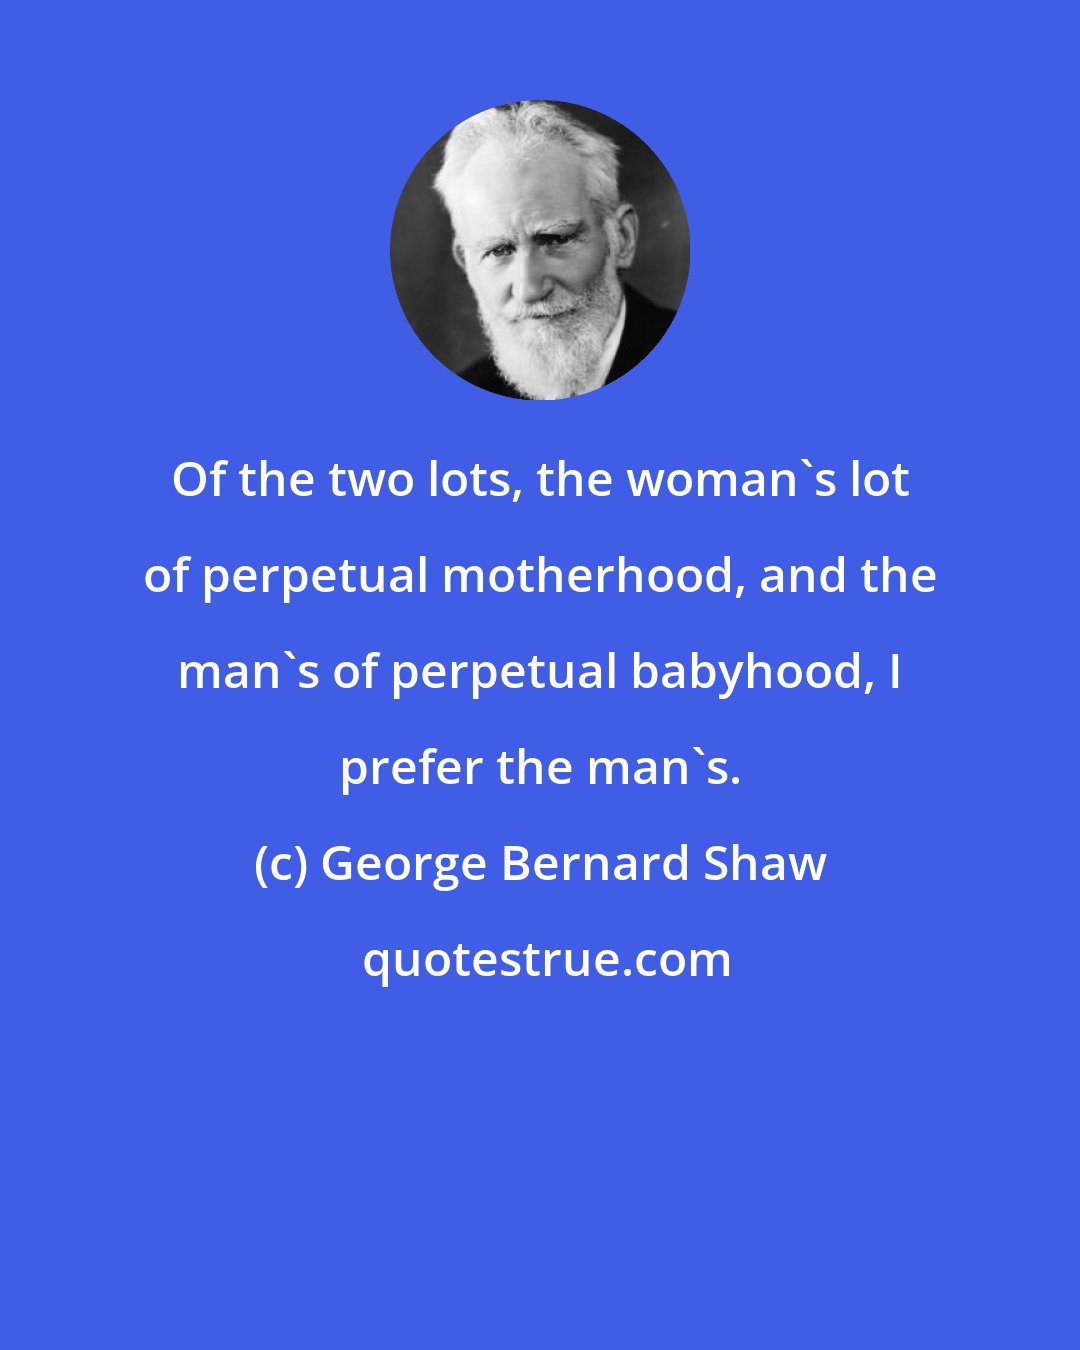 George Bernard Shaw: Of the two lots, the woman's lot of perpetual motherhood, and the man's of perpetual babyhood, I prefer the man's.